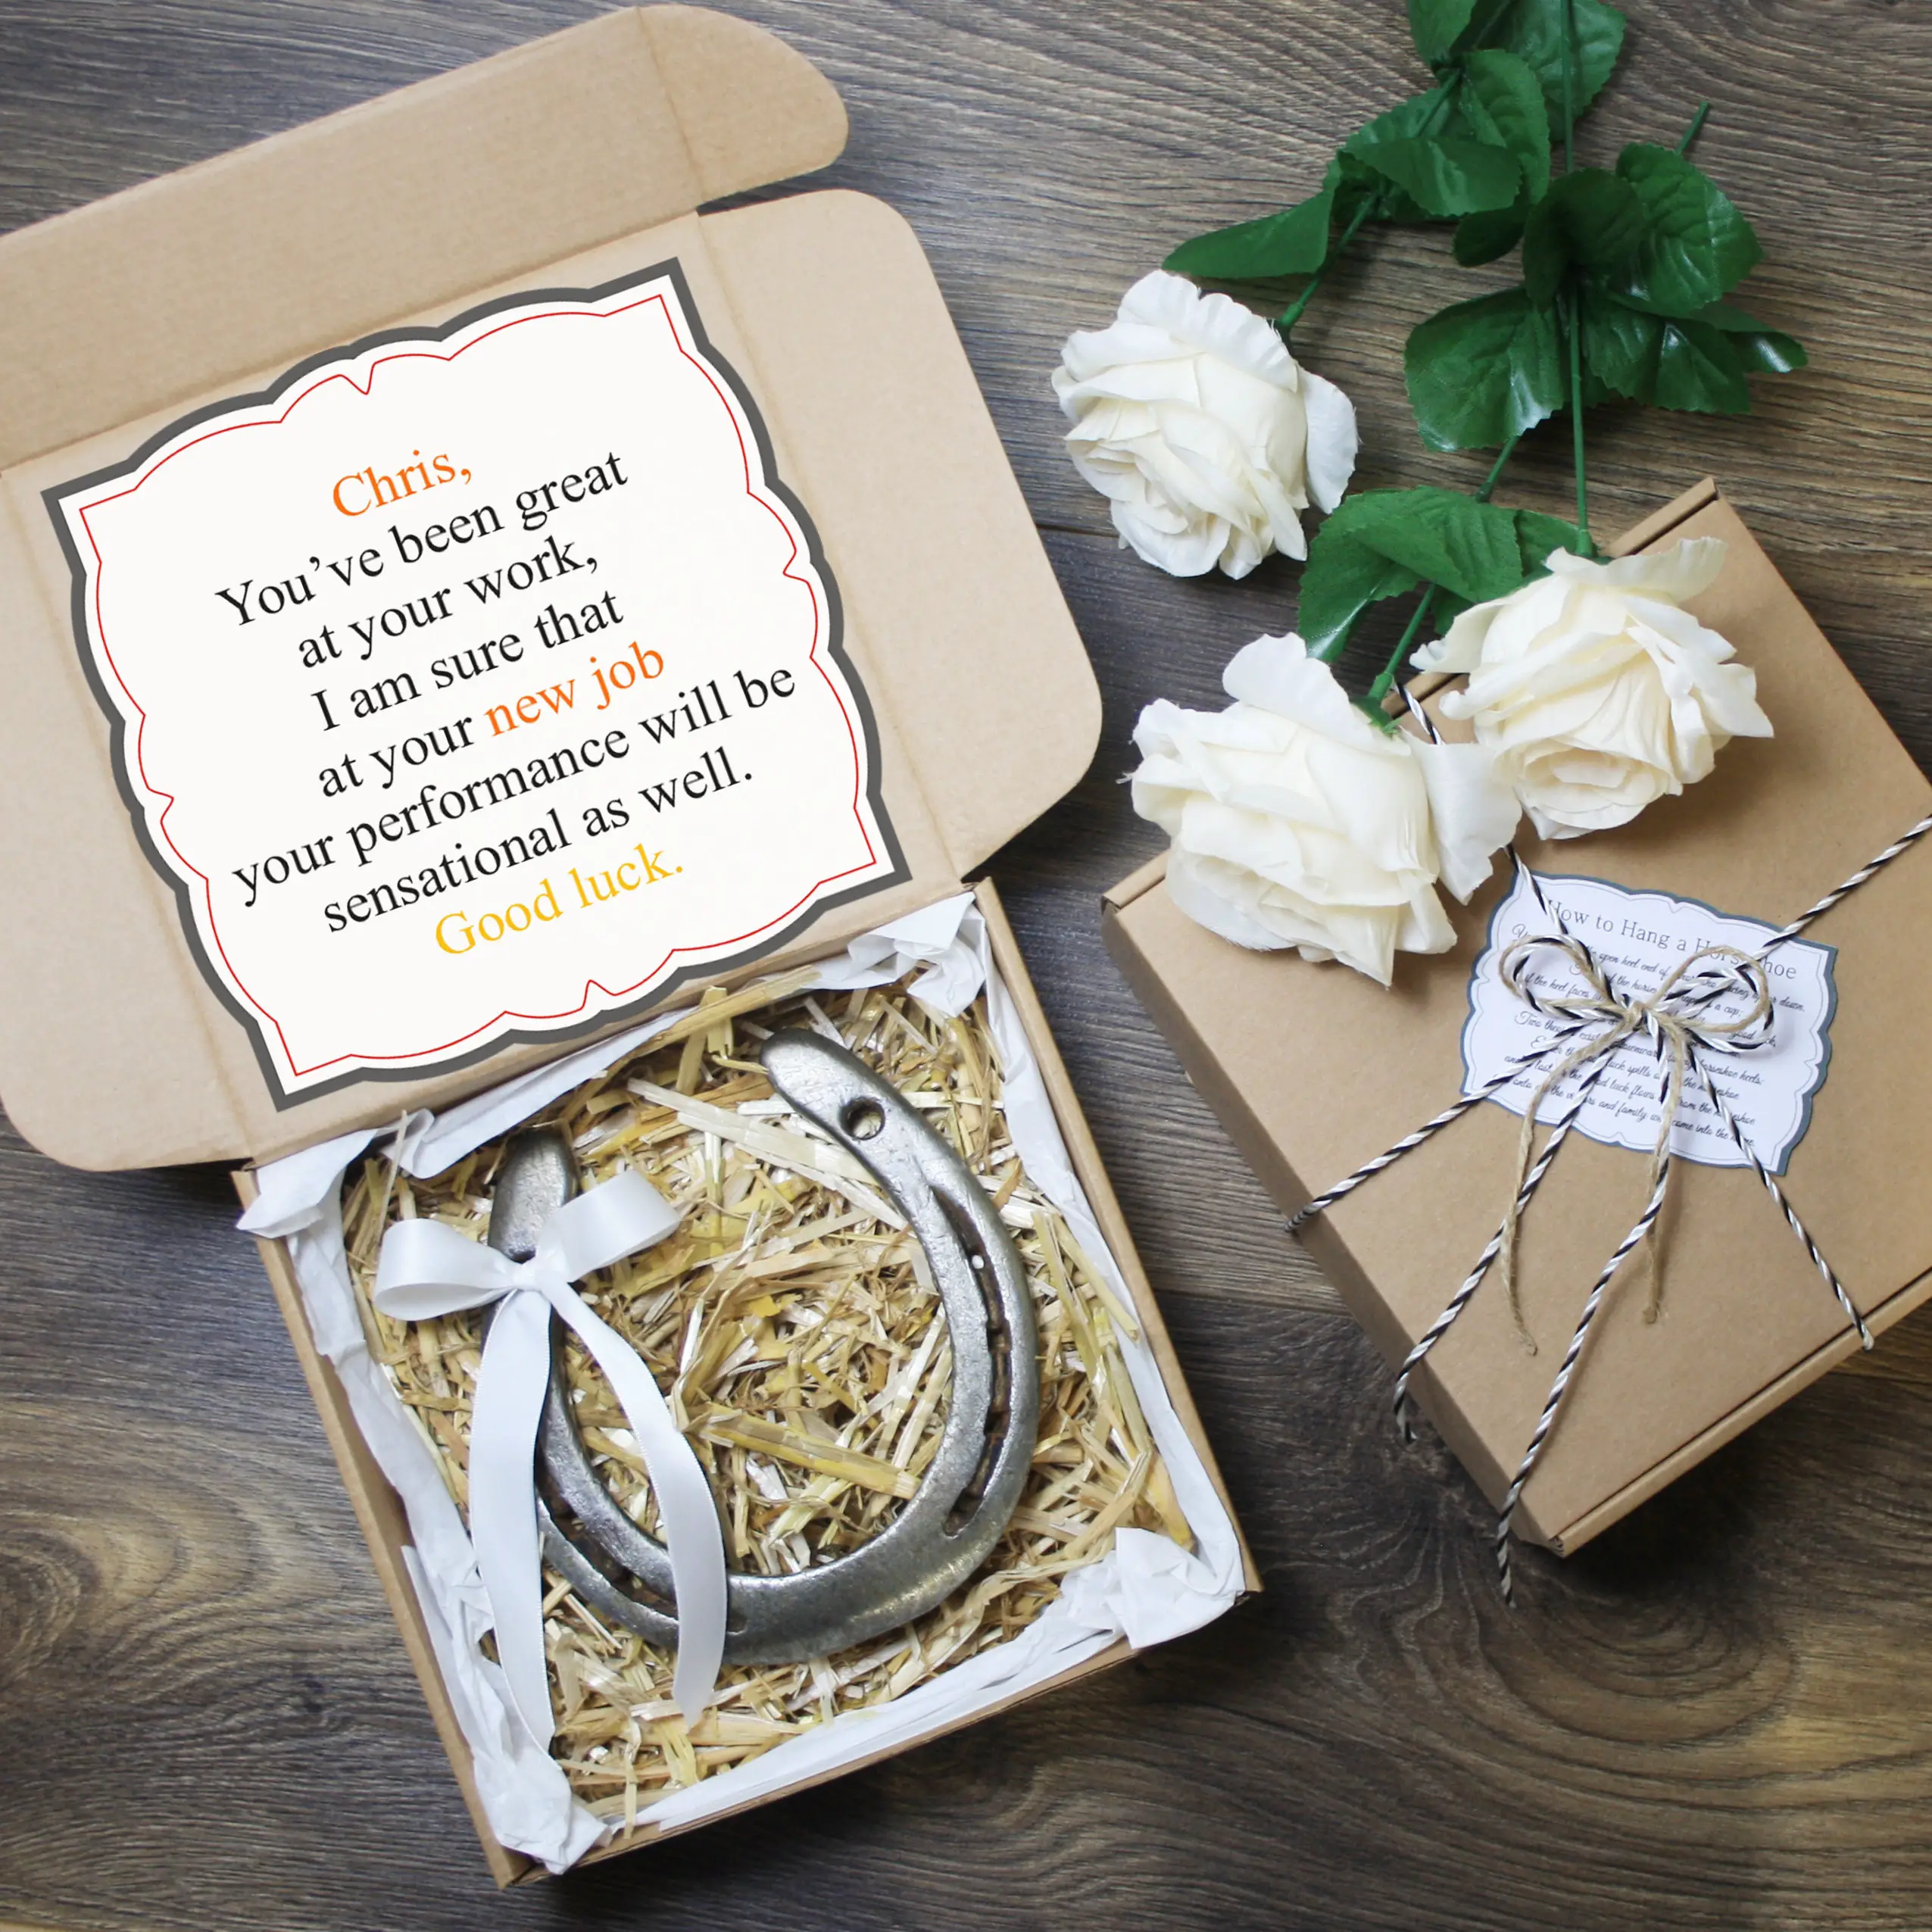 Wedding Gift For A Coworker / Steps To Wedding Gifts For Your Coworker ...